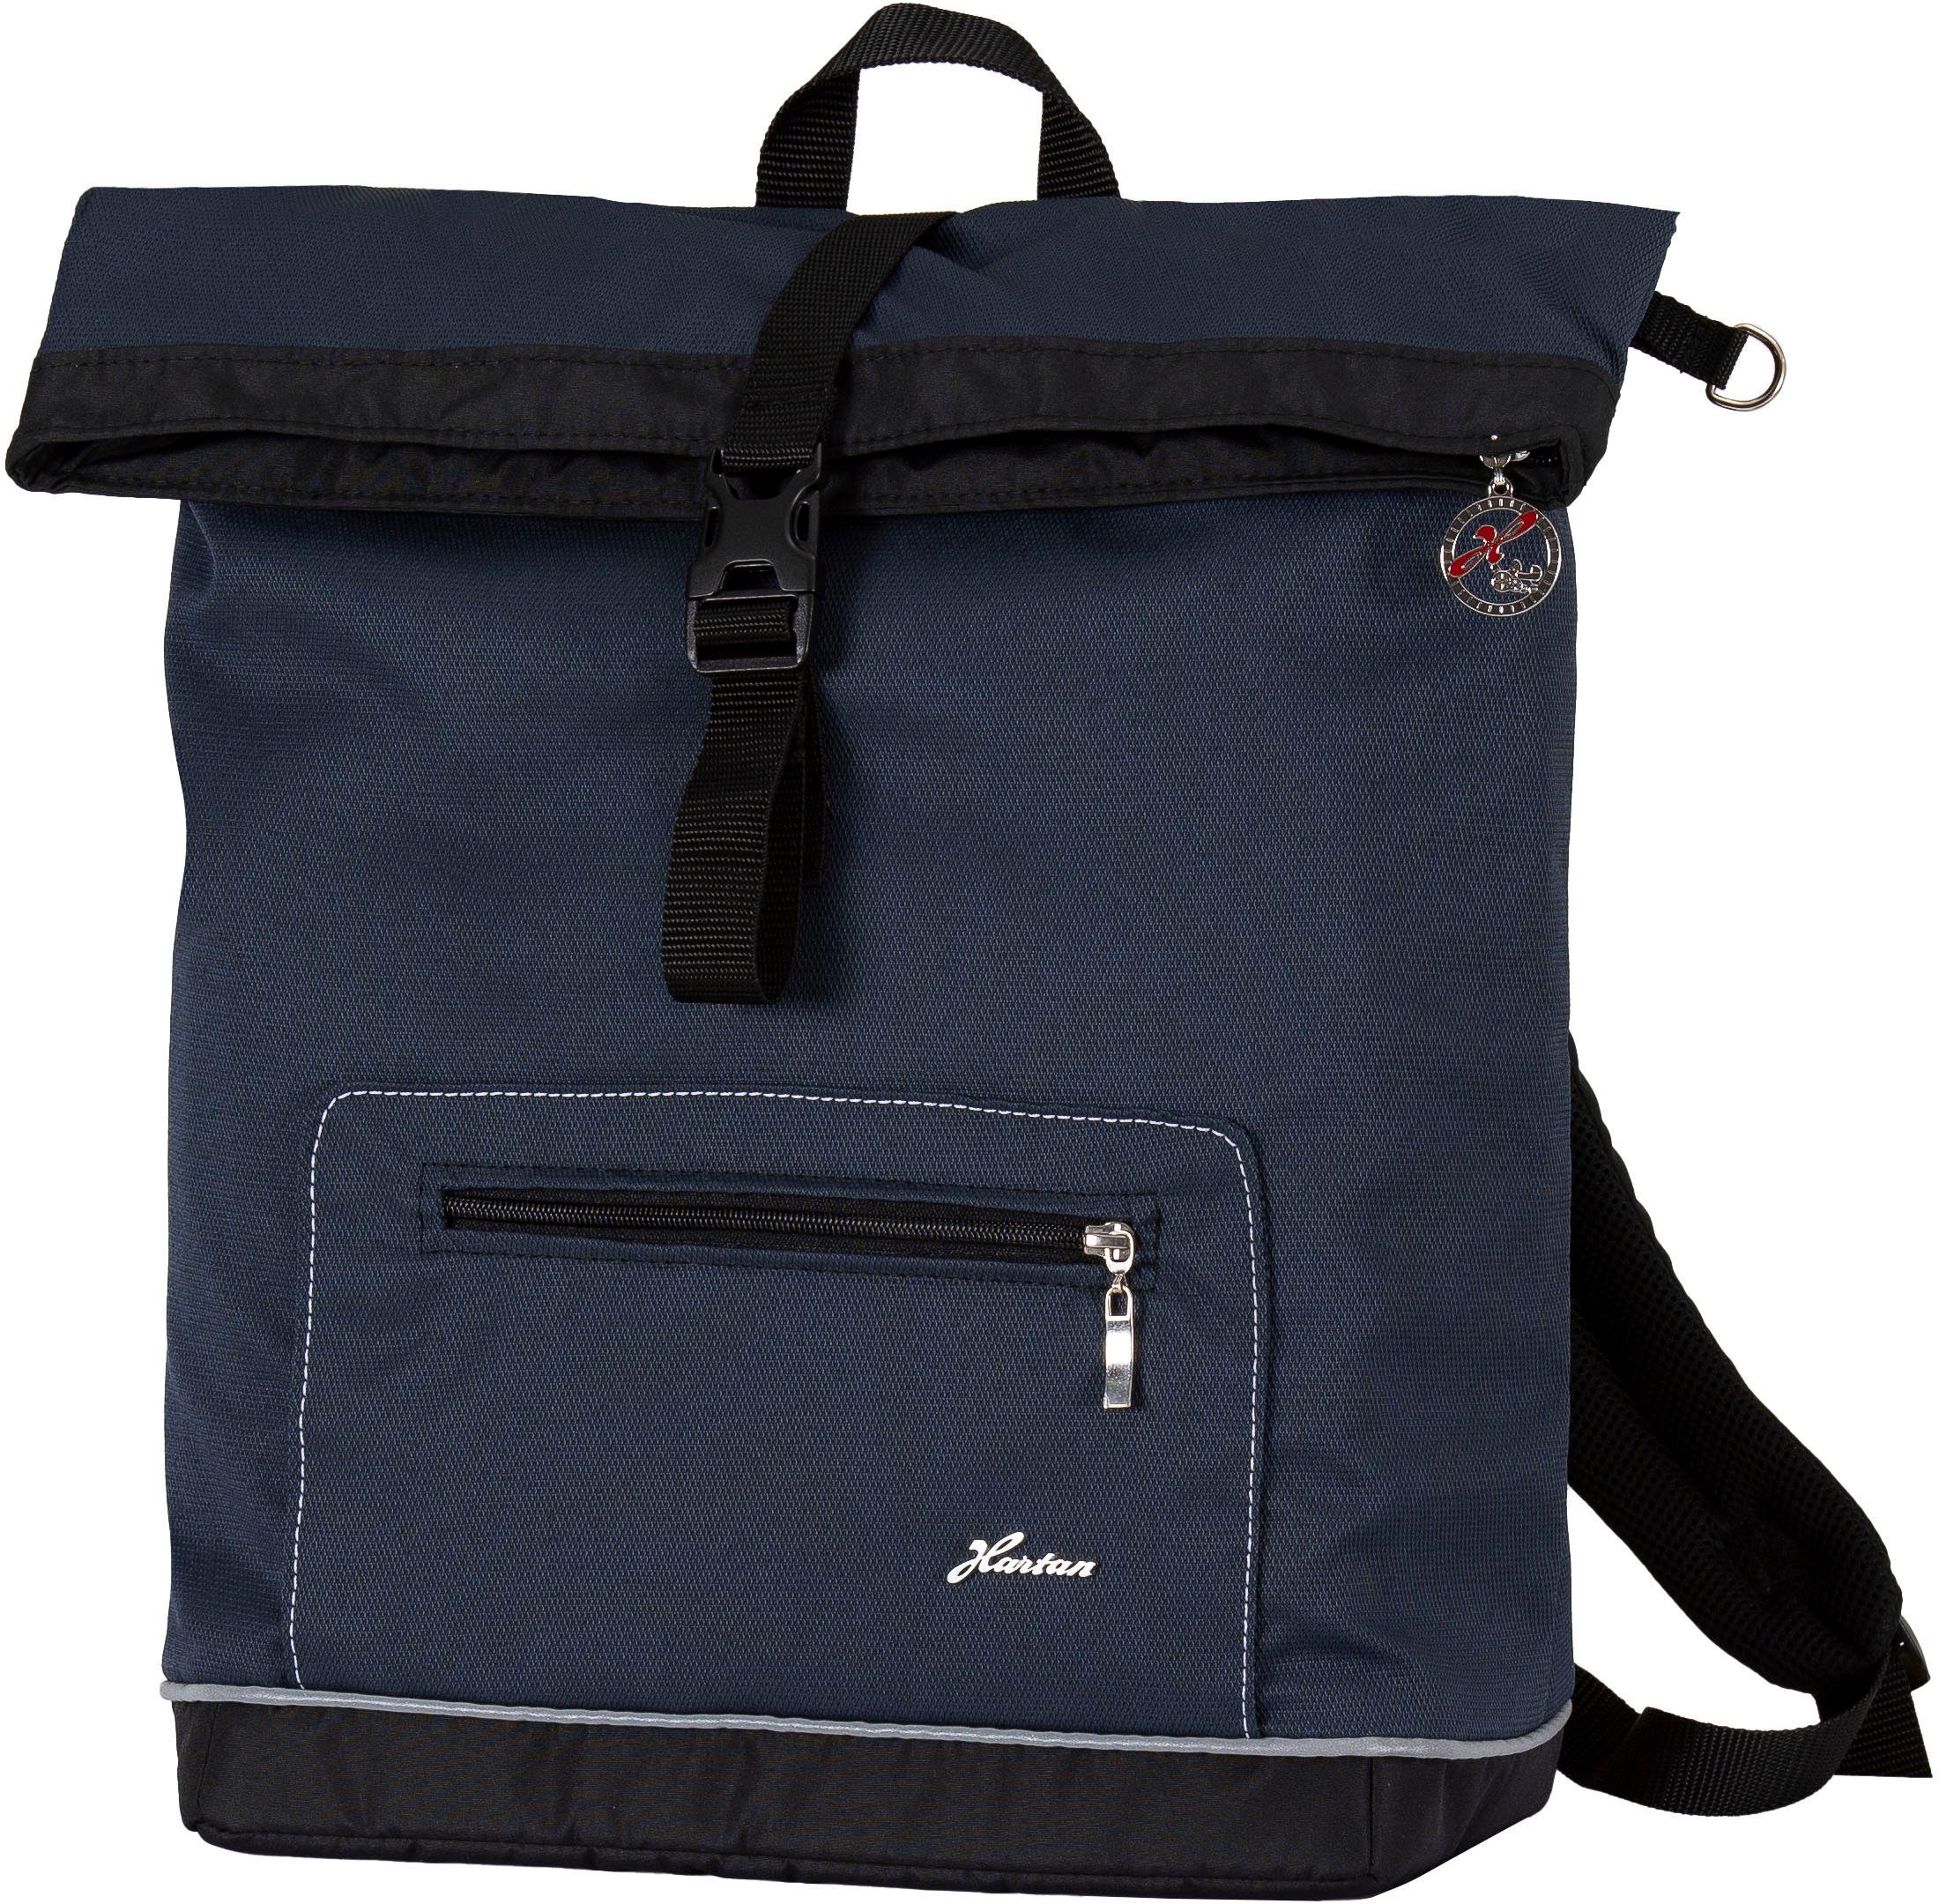 Hartan Wickelrucksack Space bag - in Germany Collection, mit Thermofach; Made stripes navy Casual